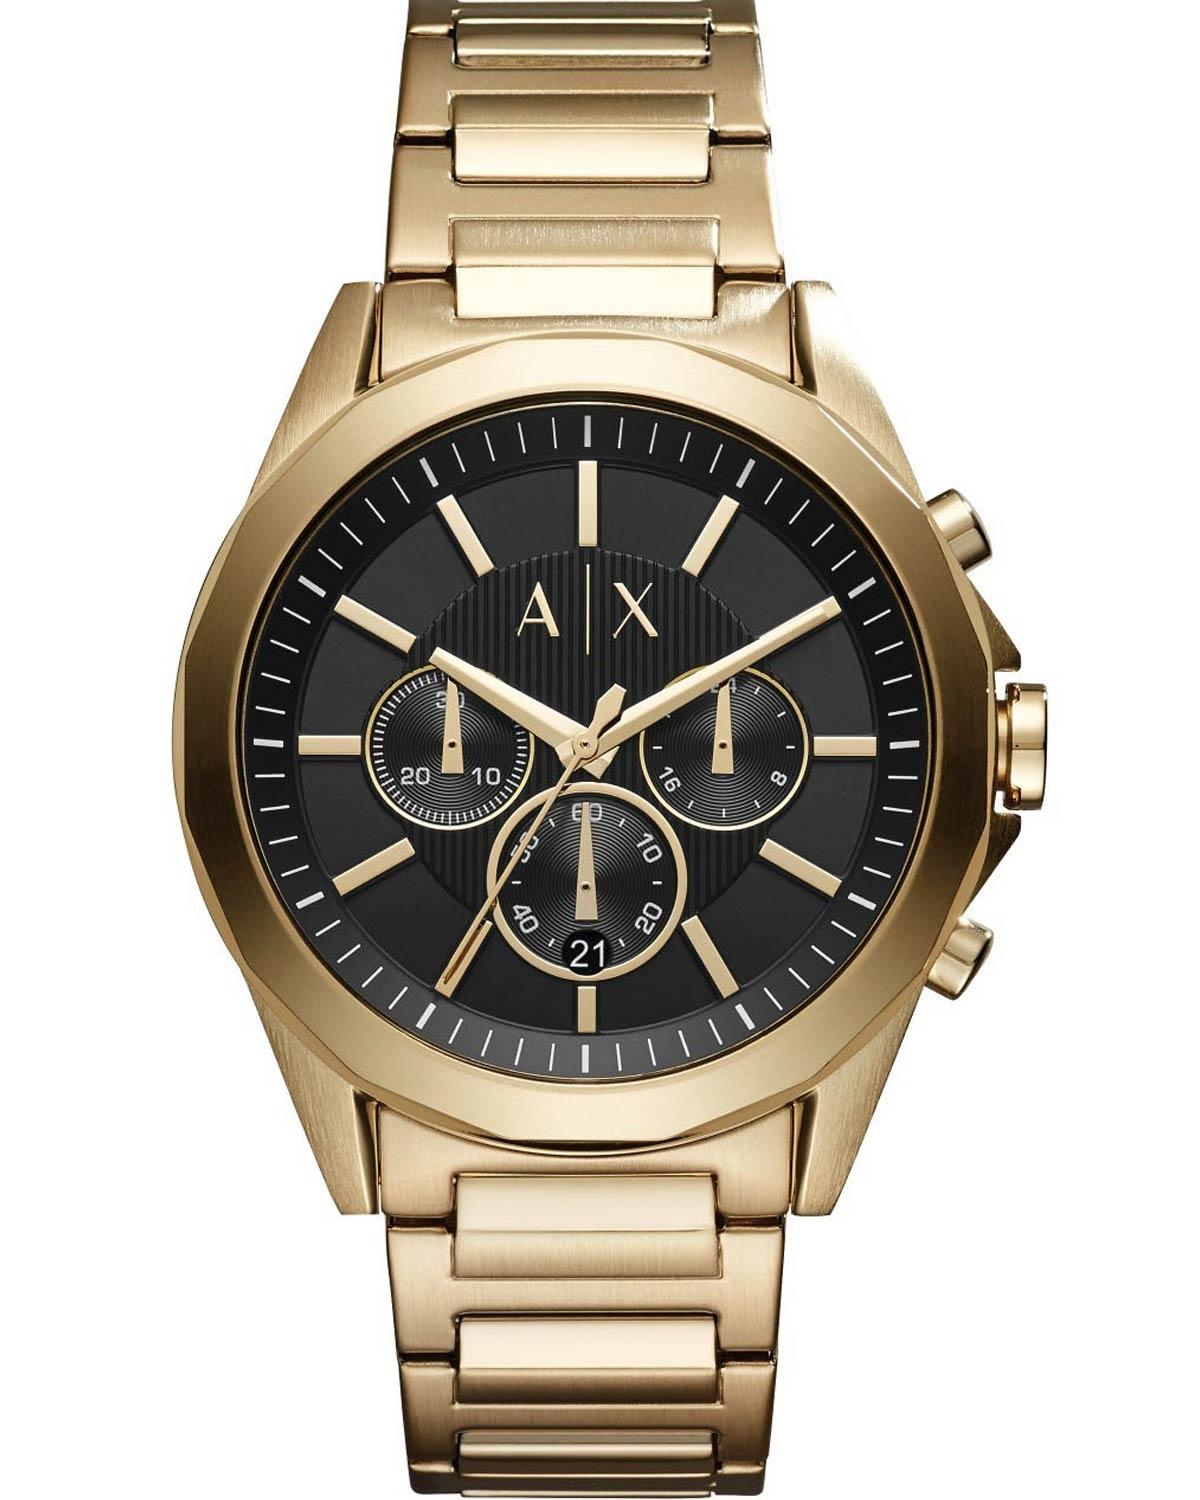 ARMANI EXCHANGE Drexler Mens Chronograph - AX2611, Gold case with Stainless Steel Bracelet